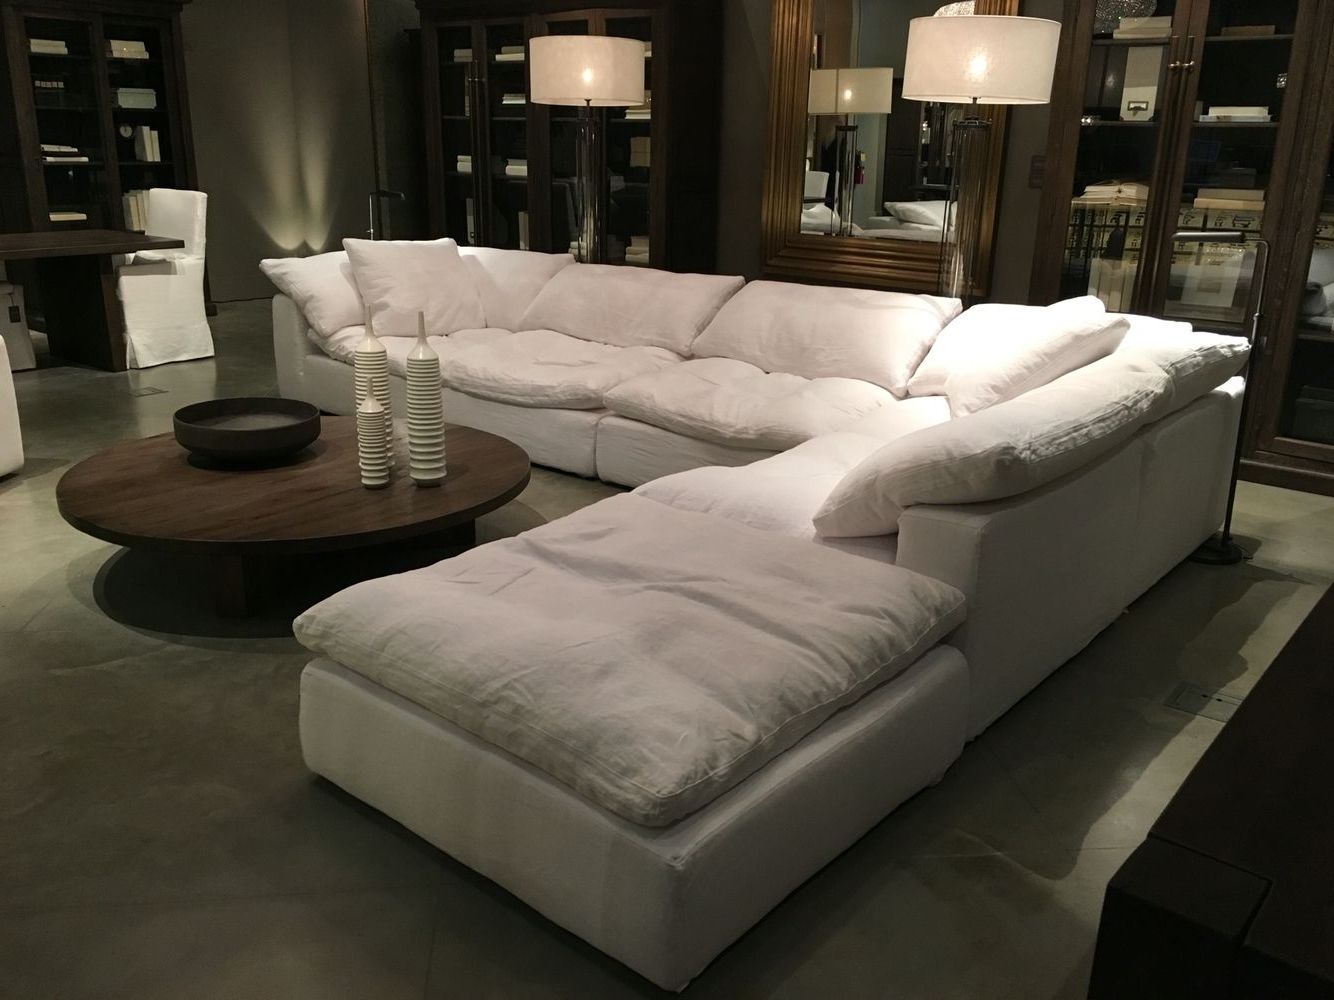 [%restoration Hardware Sectional "cloud" Couch | [future Home Inside Current Comfy Sectional Sofas|comfy Sectional Sofas Within Recent Restoration Hardware Sectional "cloud" Couch | [future Home|popular Comfy Sectional Sofas Regarding Restoration Hardware Sectional "cloud" Couch | [future Home|trendy Restoration Hardware Sectional "cloud" Couch | [future Home With Comfy Sectional Sofas%] (Photo 2 of 15)